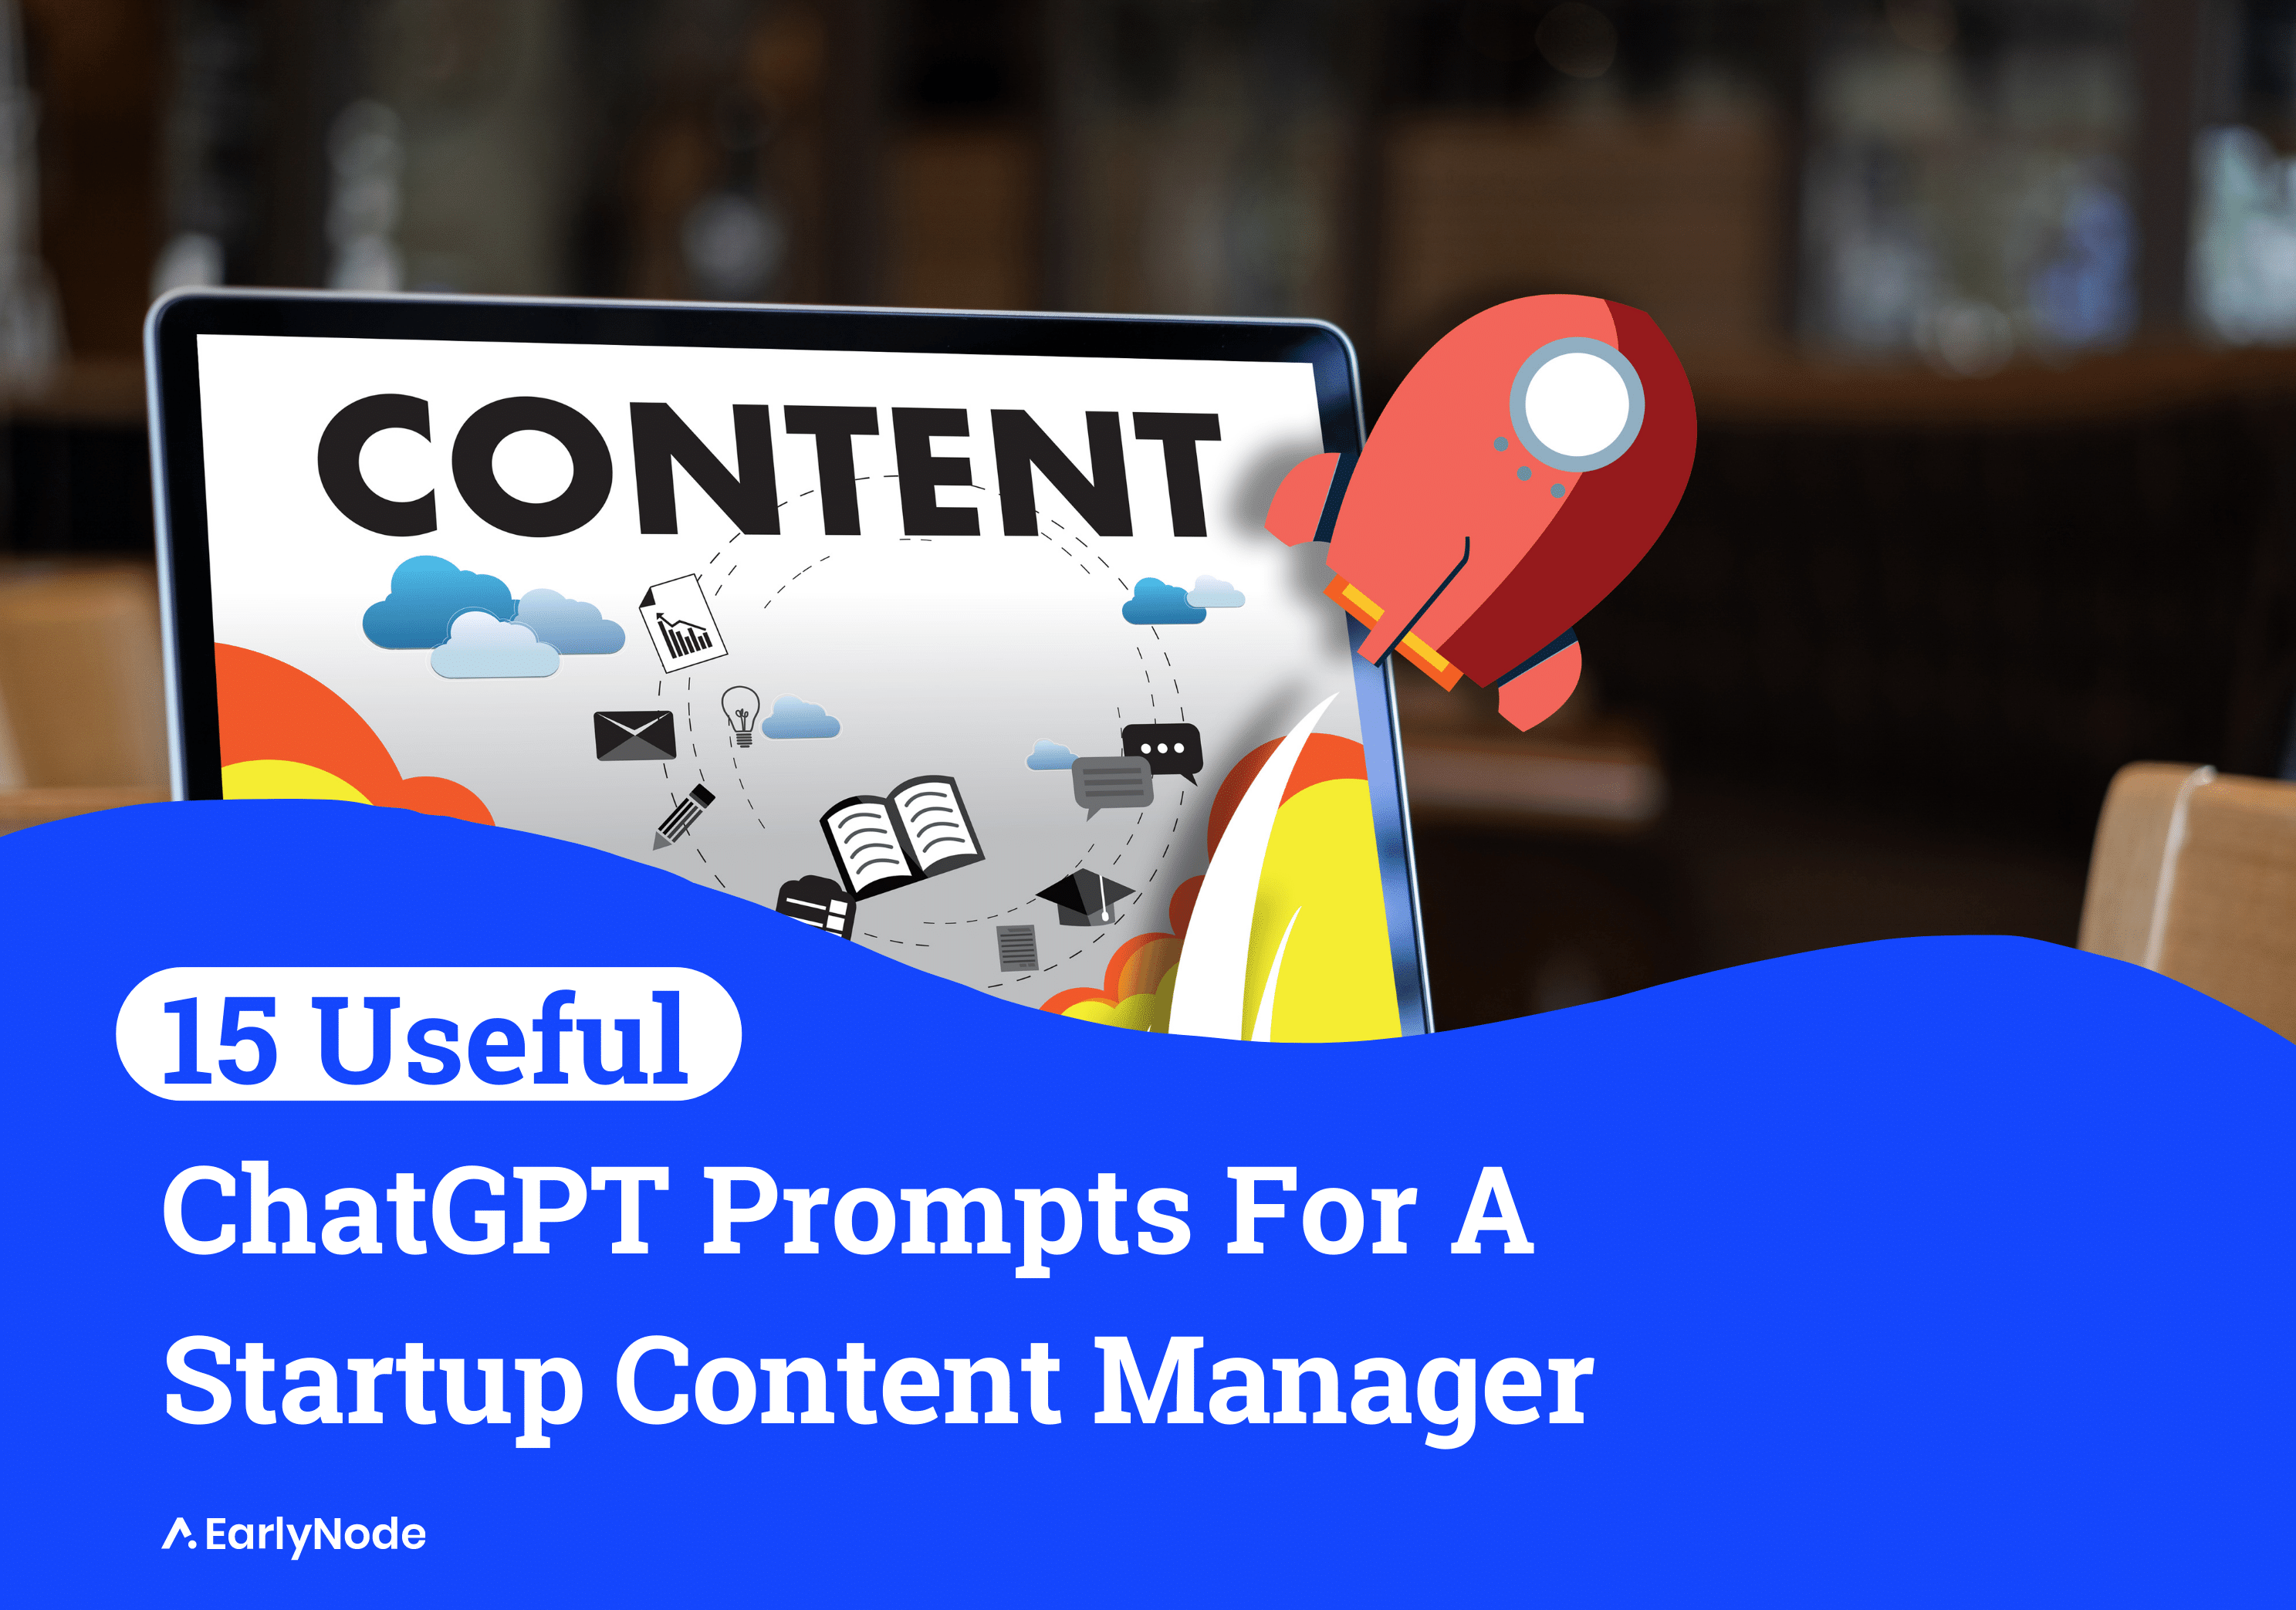 15 Incredibly Useful ChatGPT Prompts for Startup Content Managers